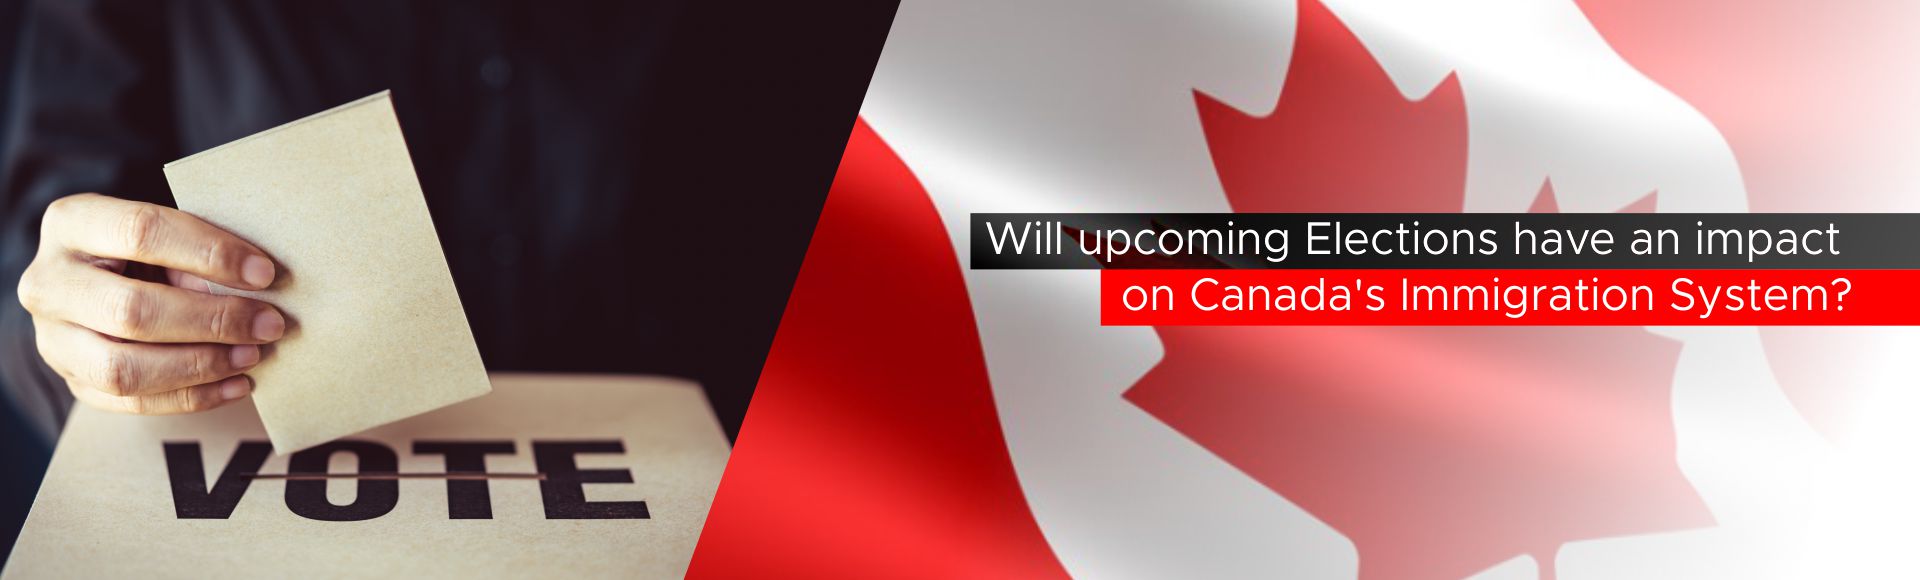 Will Upcoming Elections have an Impact on Canada's Immigration System?